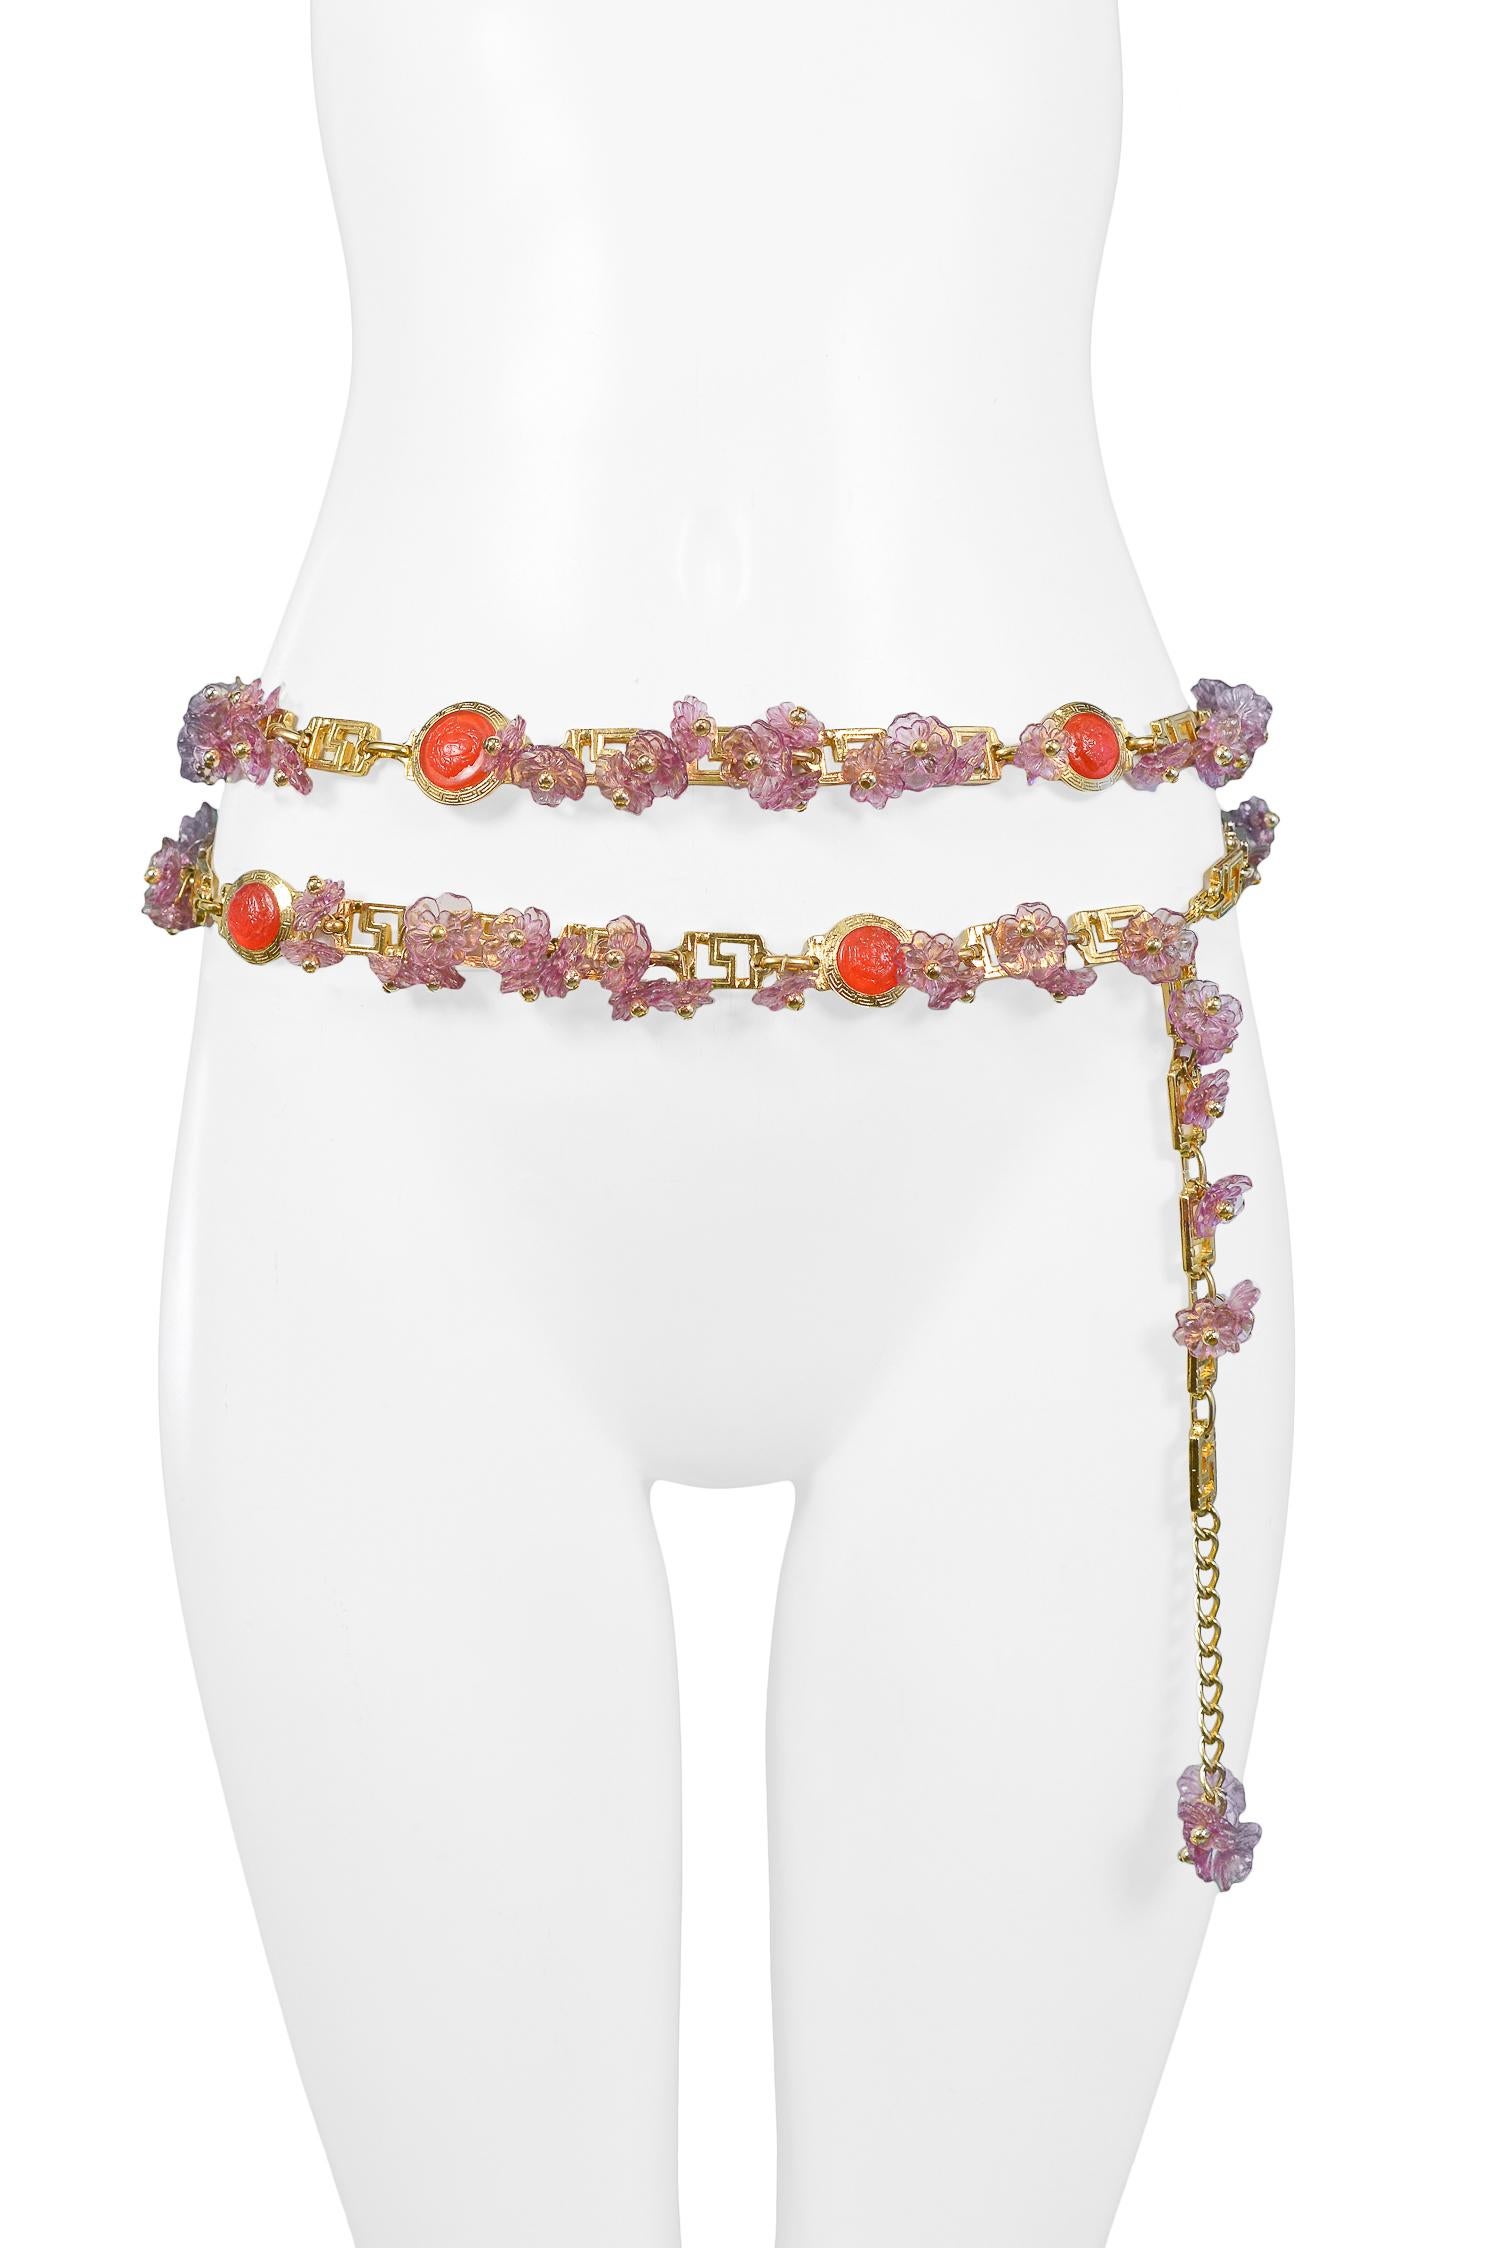 Vintage Gianni Versace lavender acrylic floral charm belt with gold beads, red Medusa medallions, and greco links. Circa, 1993.

Excellent Condition.

Size: ONE SIZE